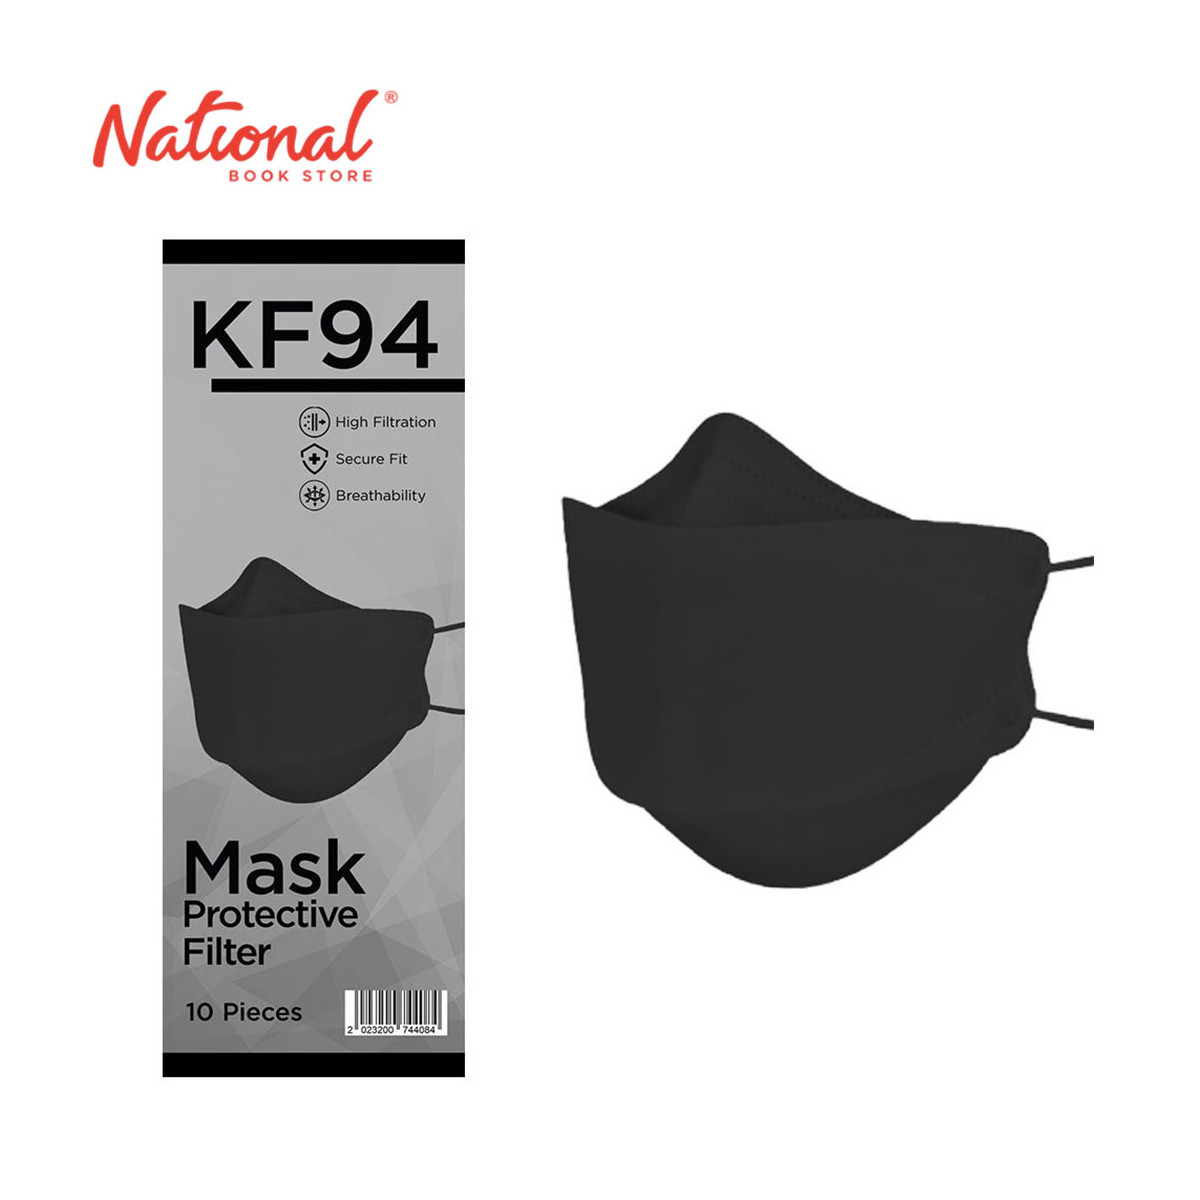 KF94 Face Mask Protective Filter Black 10's - School & Office Essentials - Medical Supplies